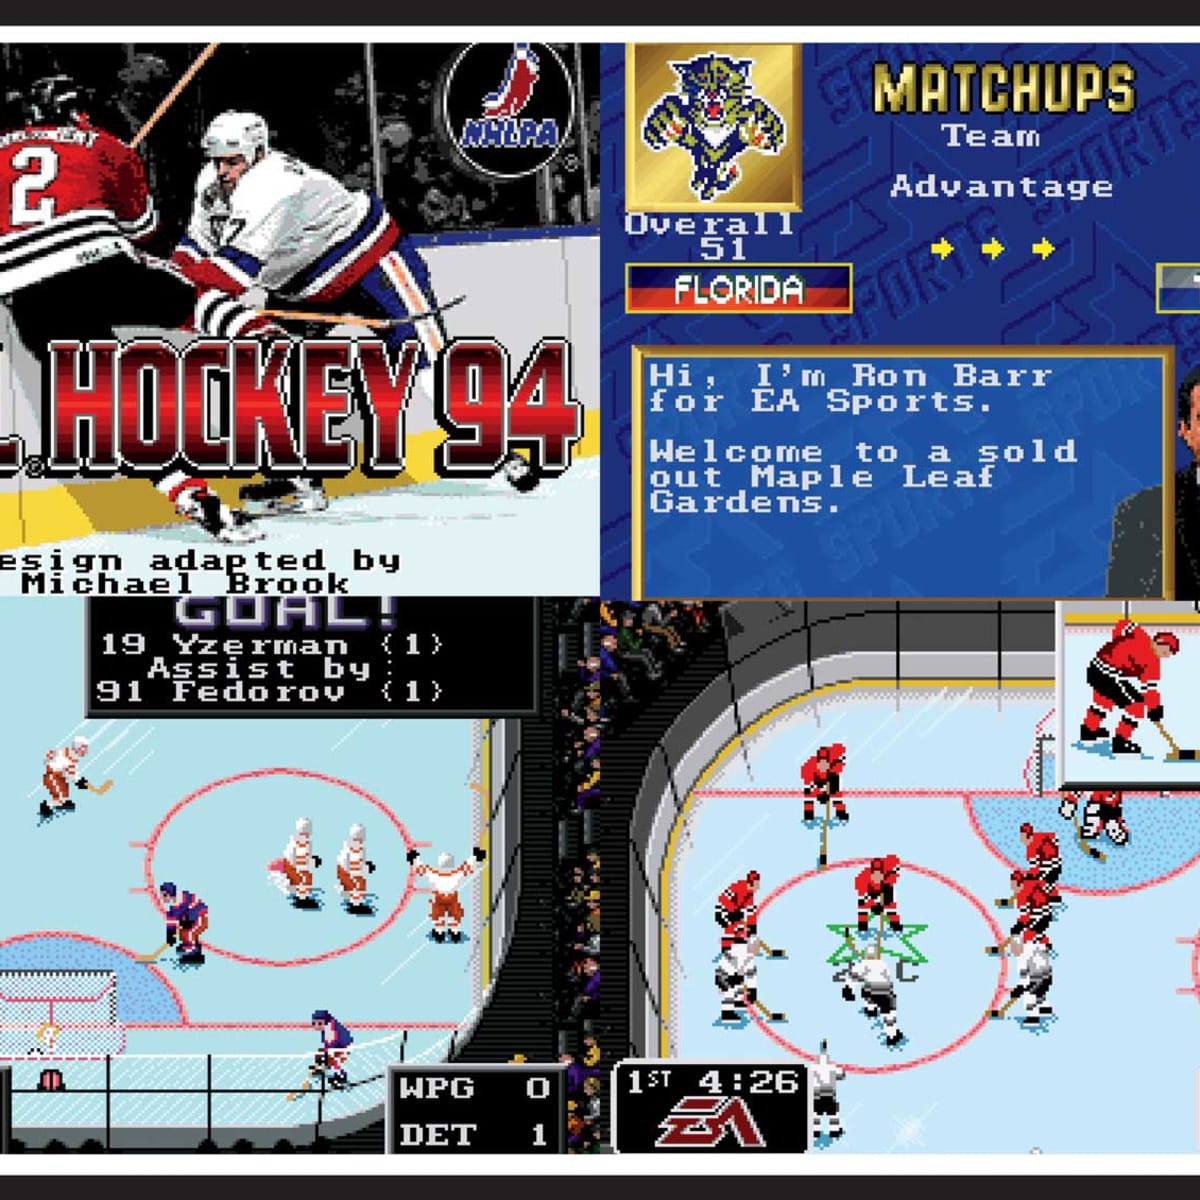 An Old Sports Game That Has Stood the Test of Time - NHL '94 - Retro Bird 